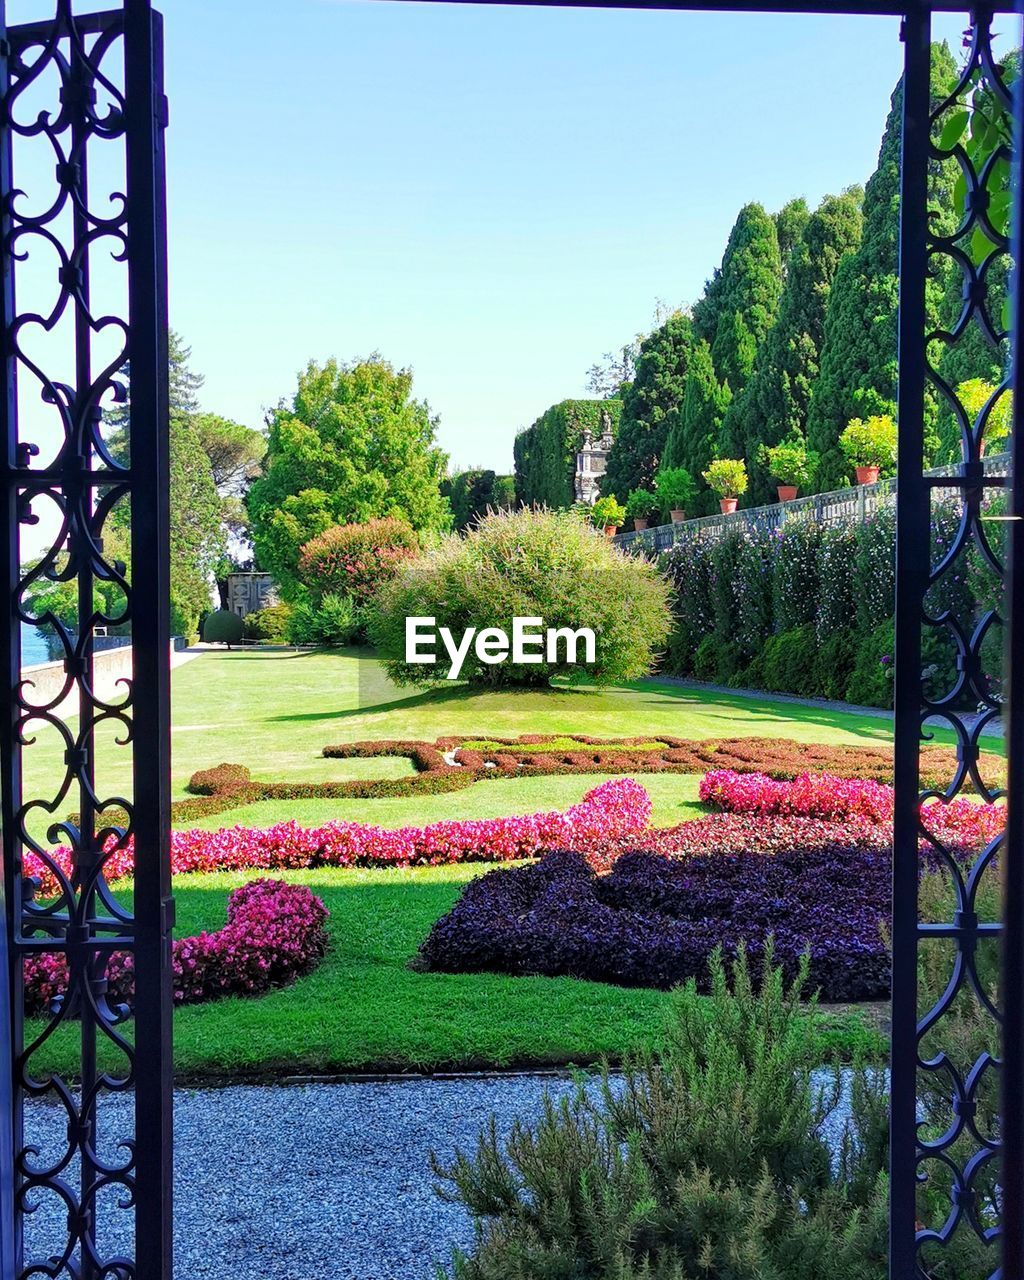 plant, nature, flower, garden, flowering plant, beauty in nature, tree, formal garden, green, growth, no people, sky, grass, day, ornamental garden, tranquility, architecture, multi colored, outdoors, scenics - nature, flowerbed, gate, lawn, park, tranquil scene, front or back yard, blue, clear sky, park - man made space, built structure, sunlight, backyard